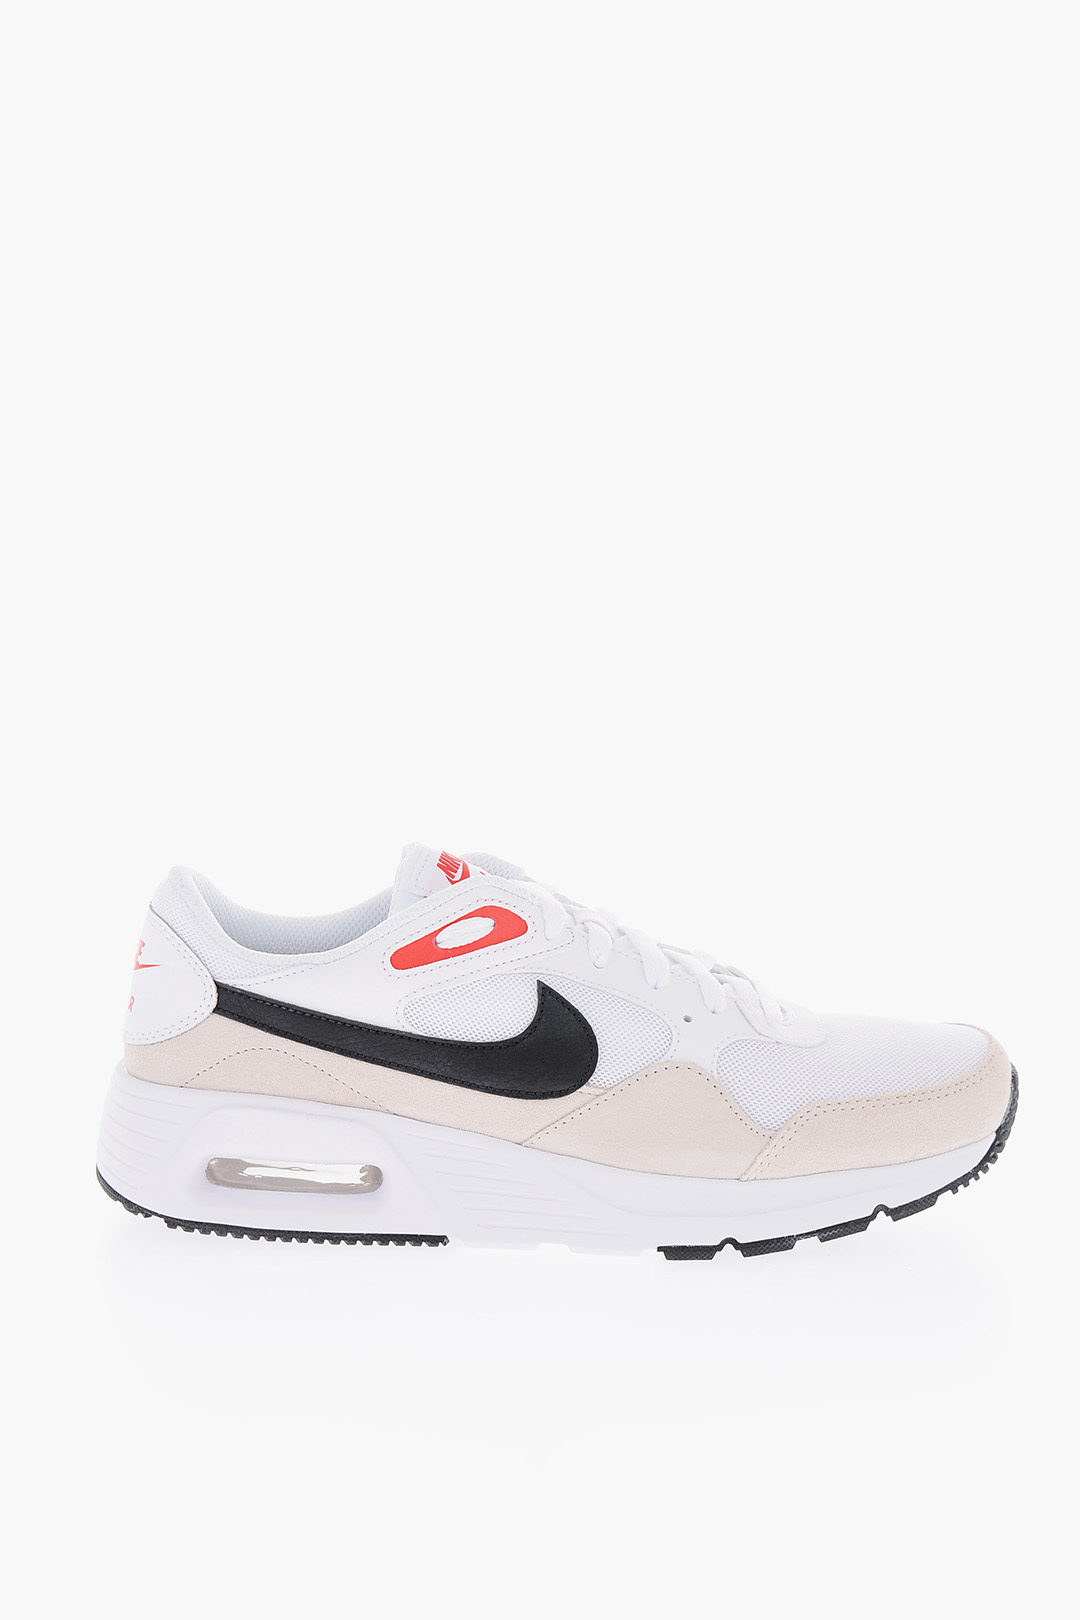 nul Concentratie ondernemen Nike Leather and Fabric AIR MAX SC Sneakers men - Glamood Outlet